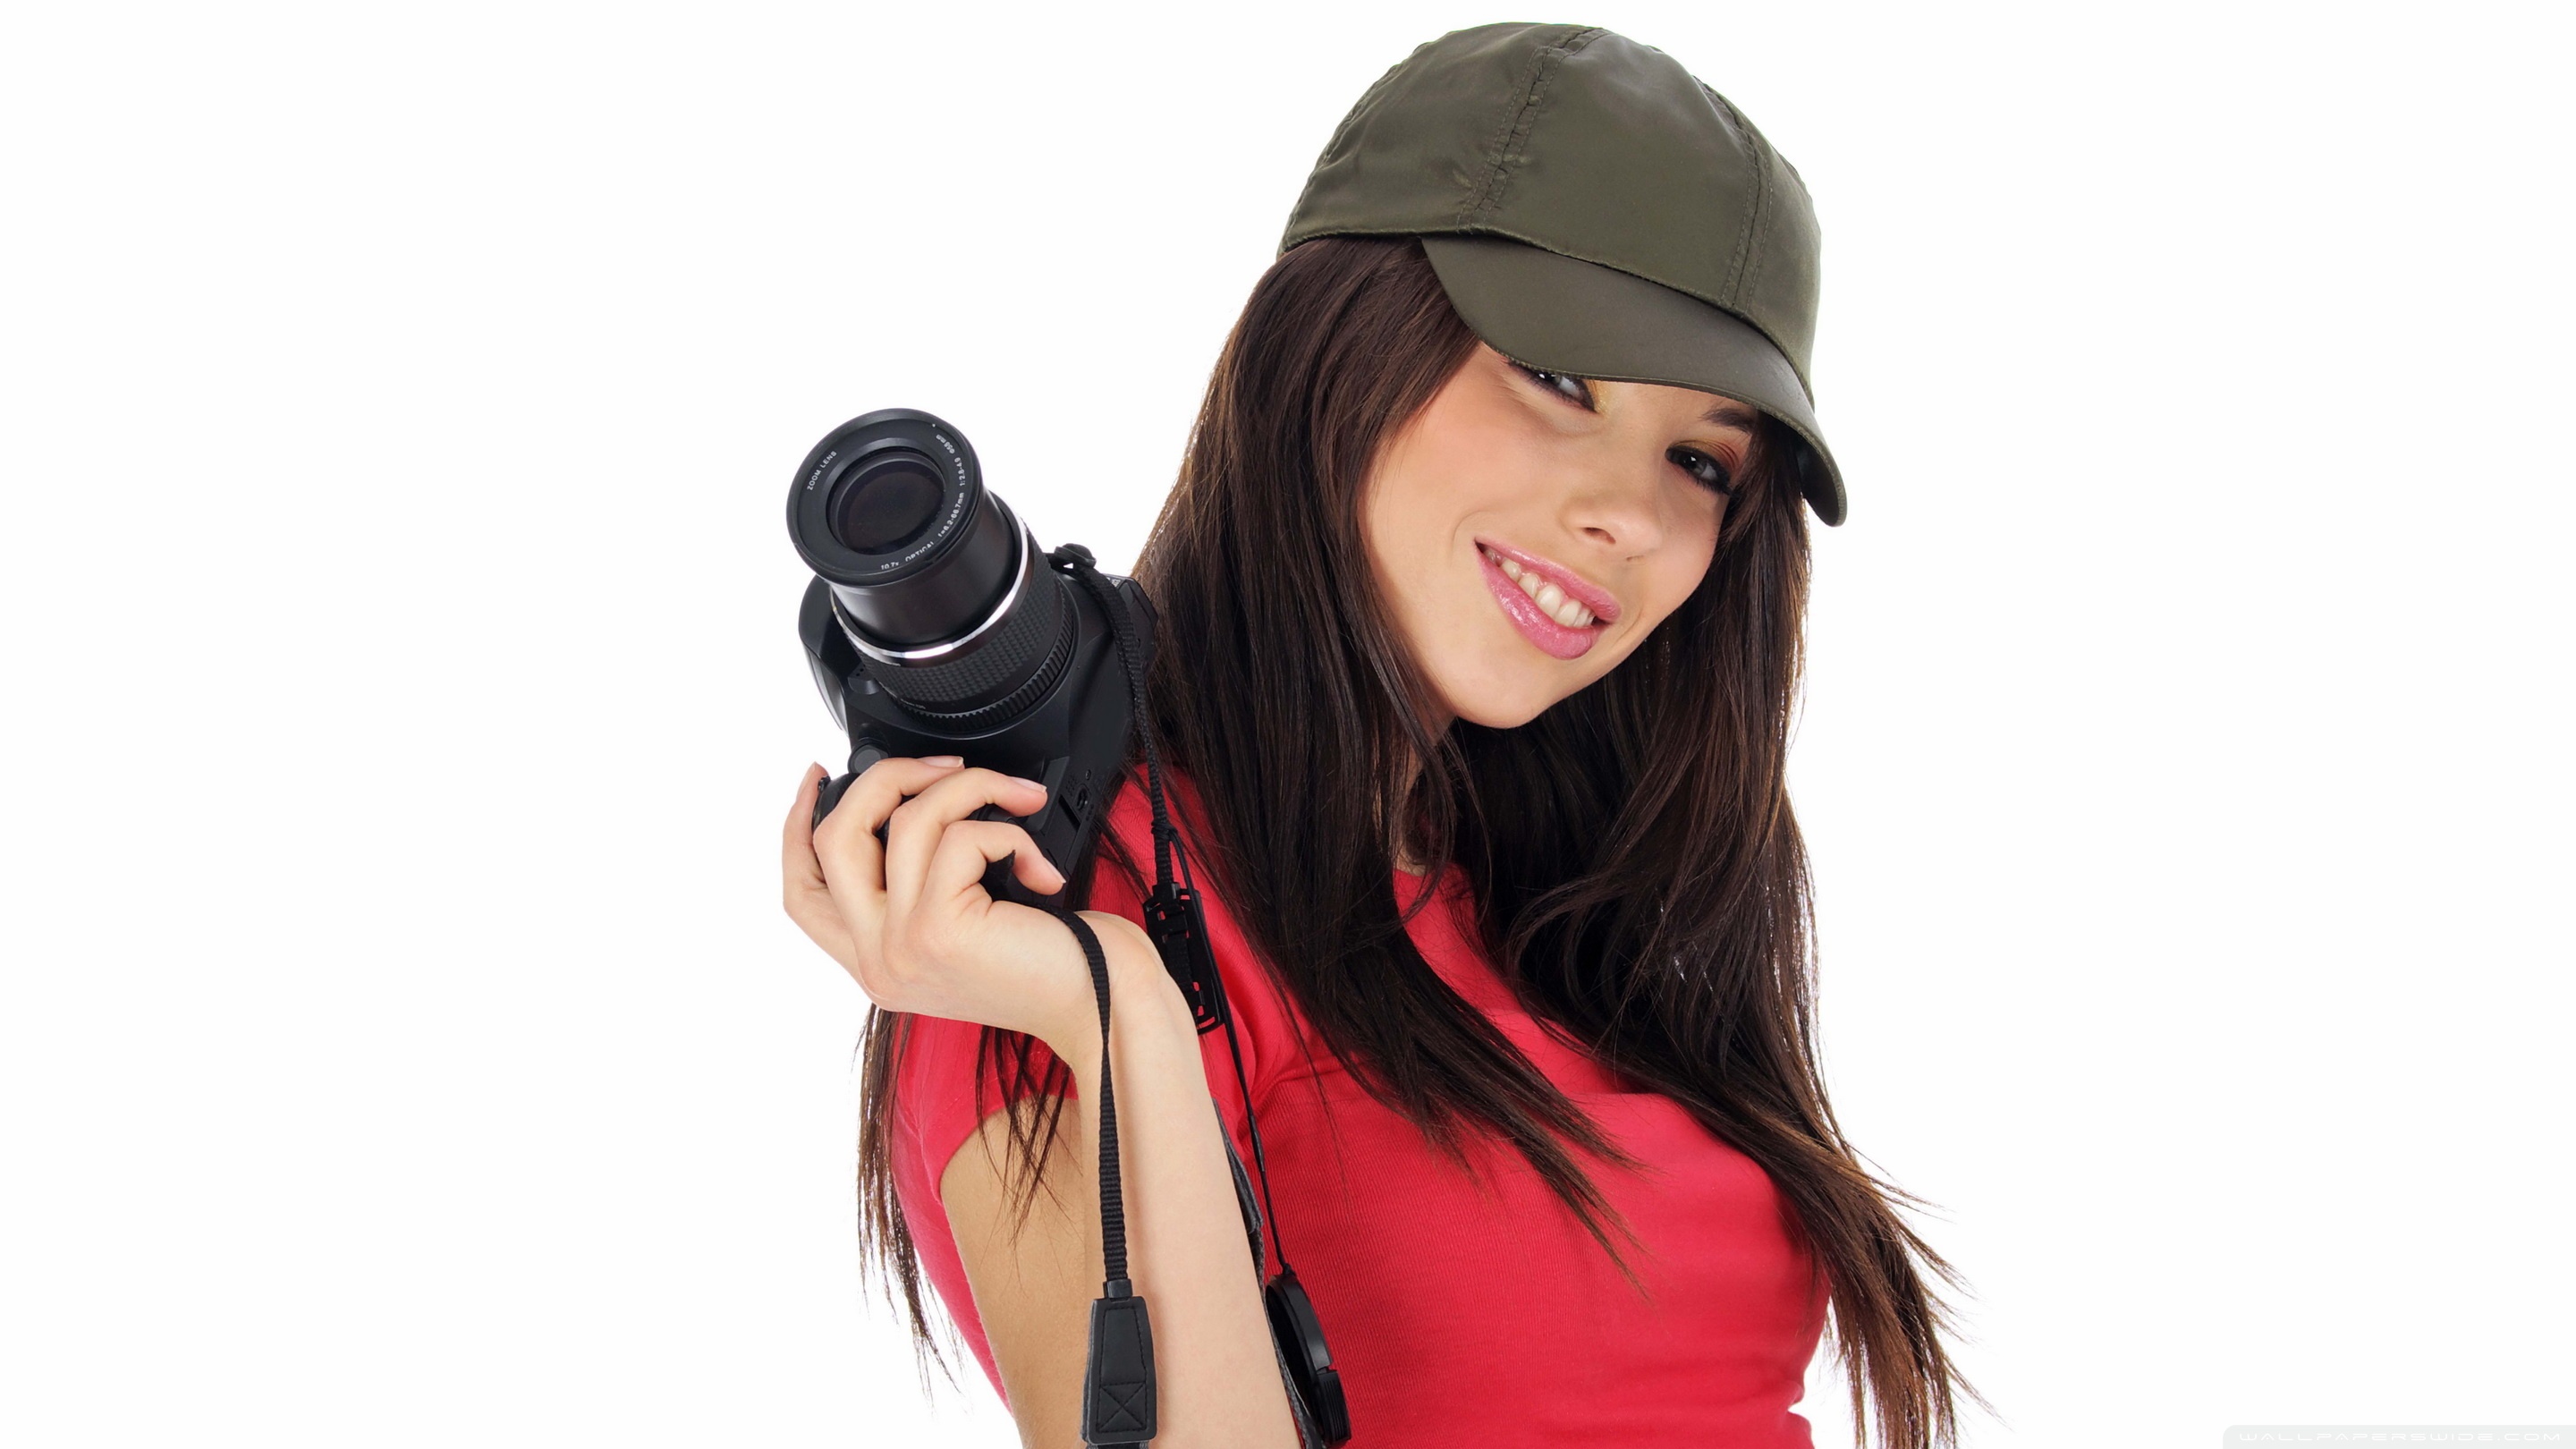 Girl with camera photo